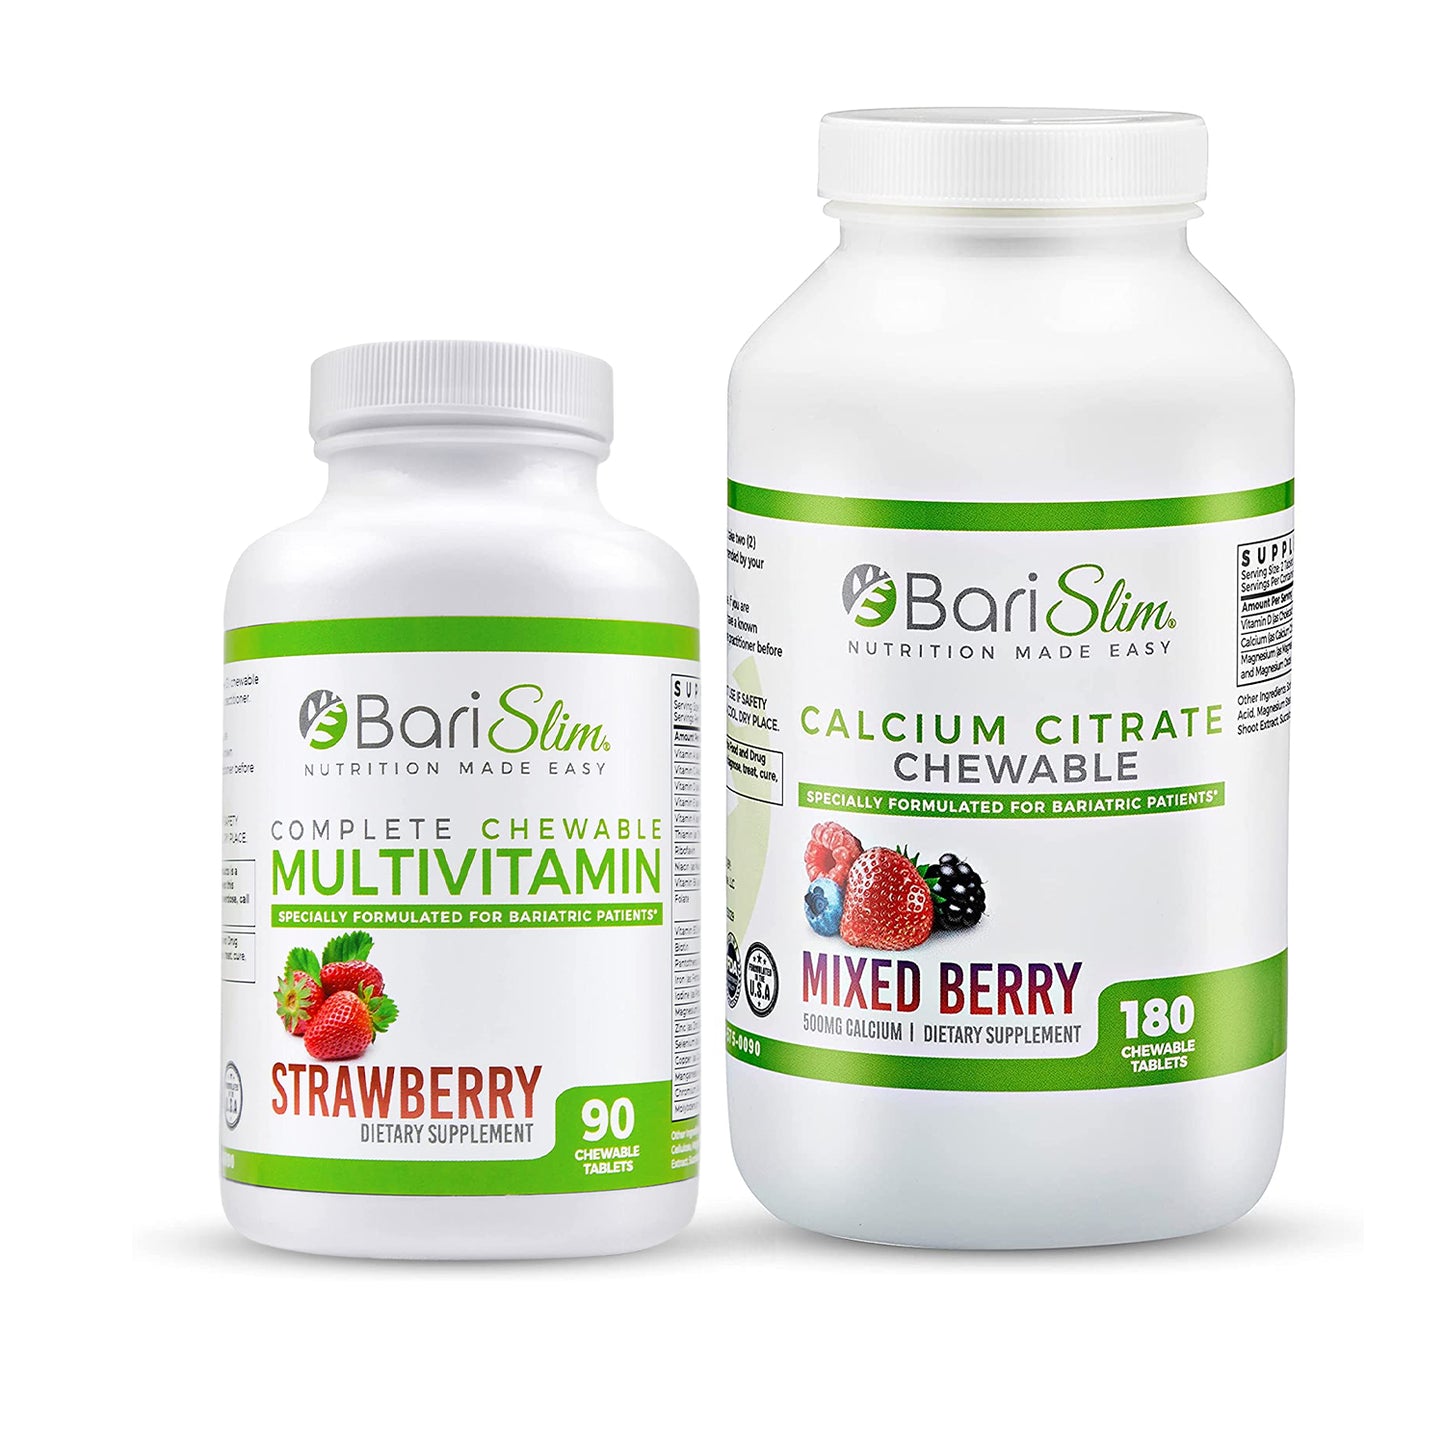 complete chewable multivitamin combo pack - strawberry and mixed berry flavor 180 tablets